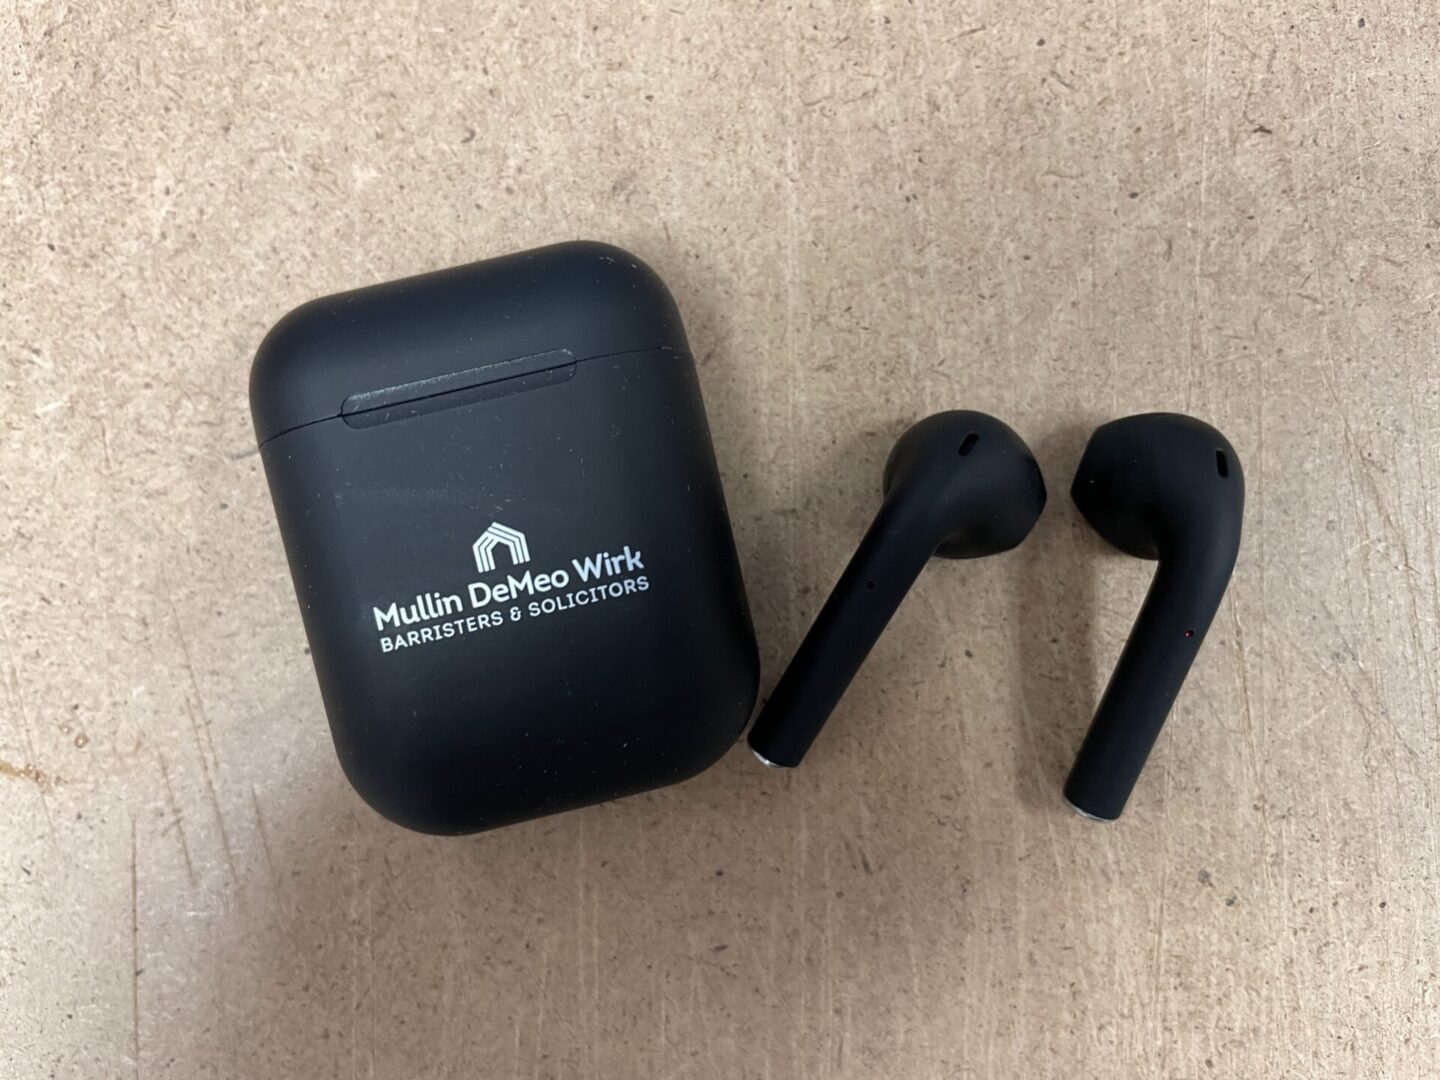 Millin DeMeo Wirk Barristers and Solicitors Ear Pods in Black